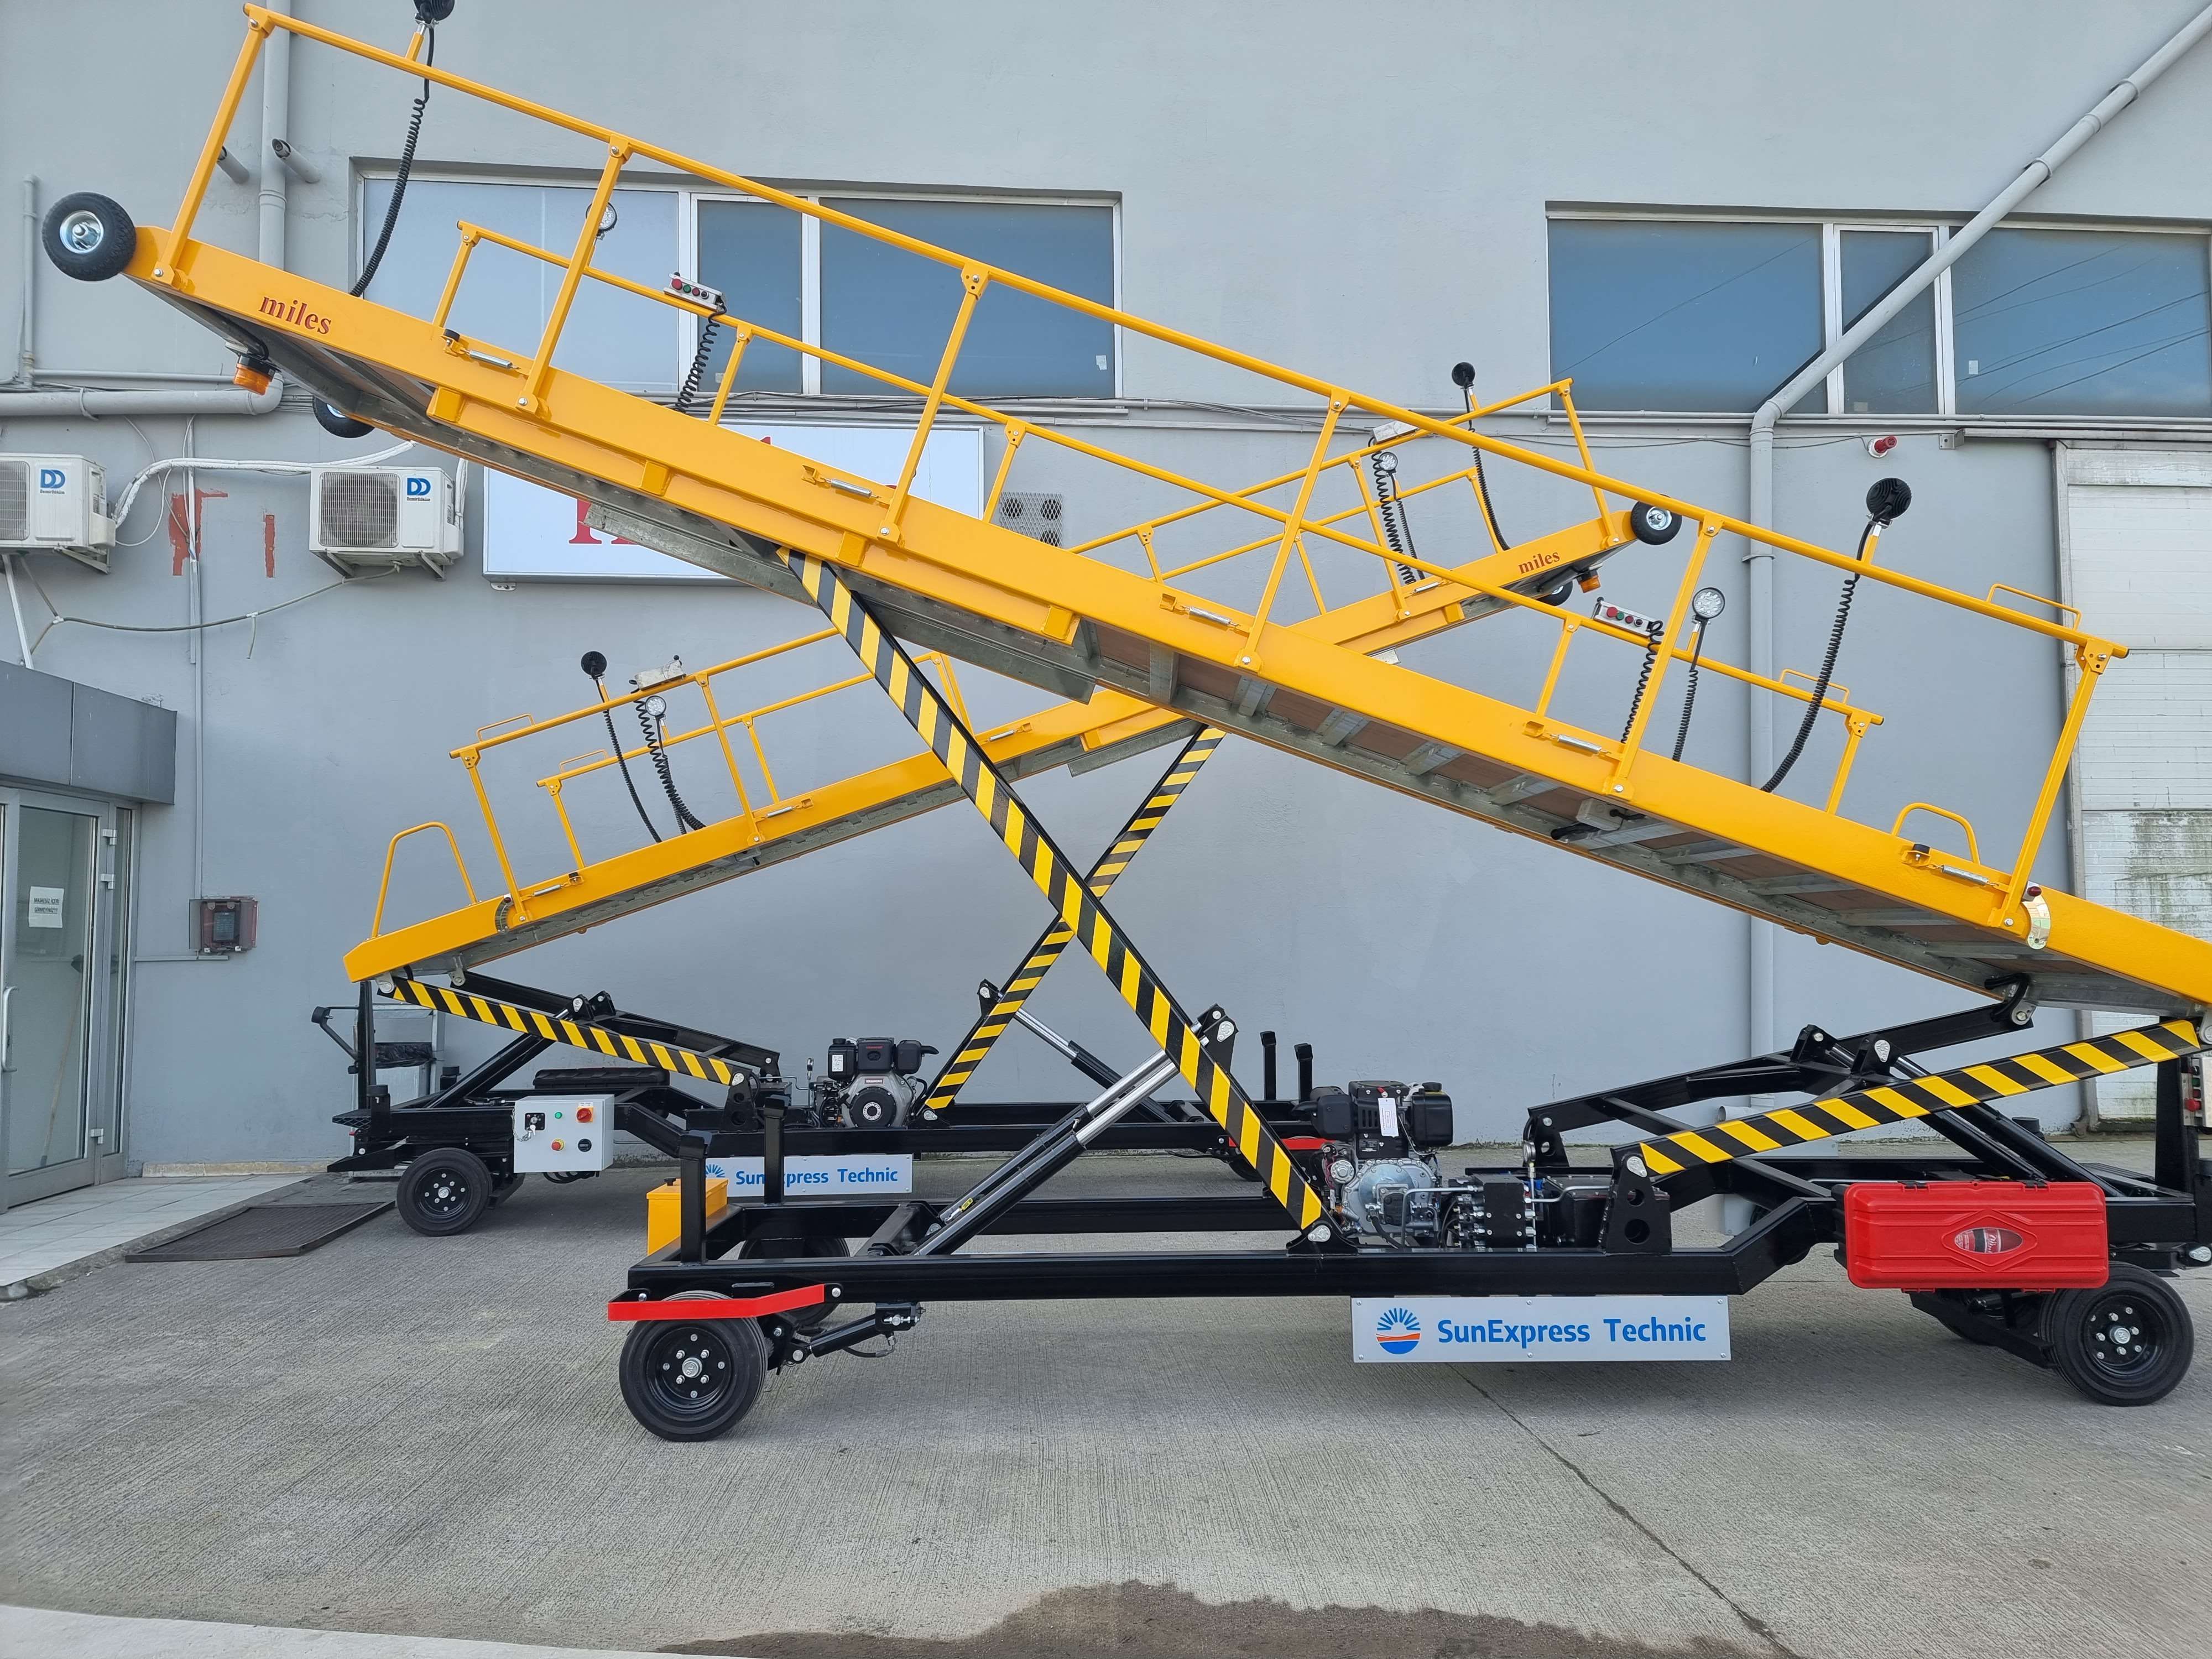 Production and delivery of tMobile Maintenance Platforms to SunExpress., Turkish Aviation Industry, Ground Support Equipment